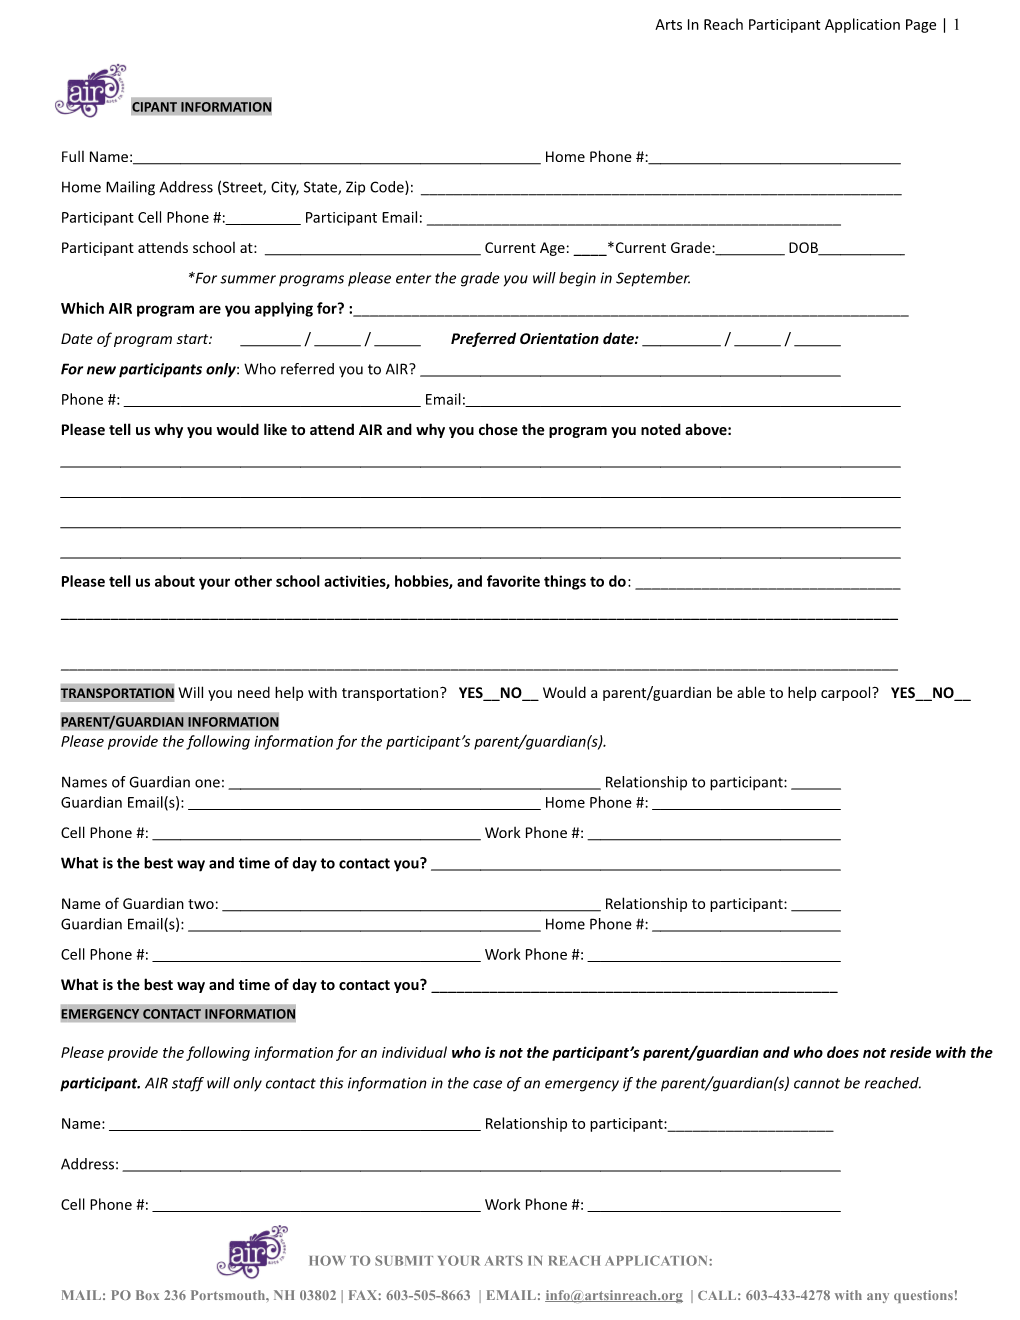 Arts in Reach Participant Application Page 1